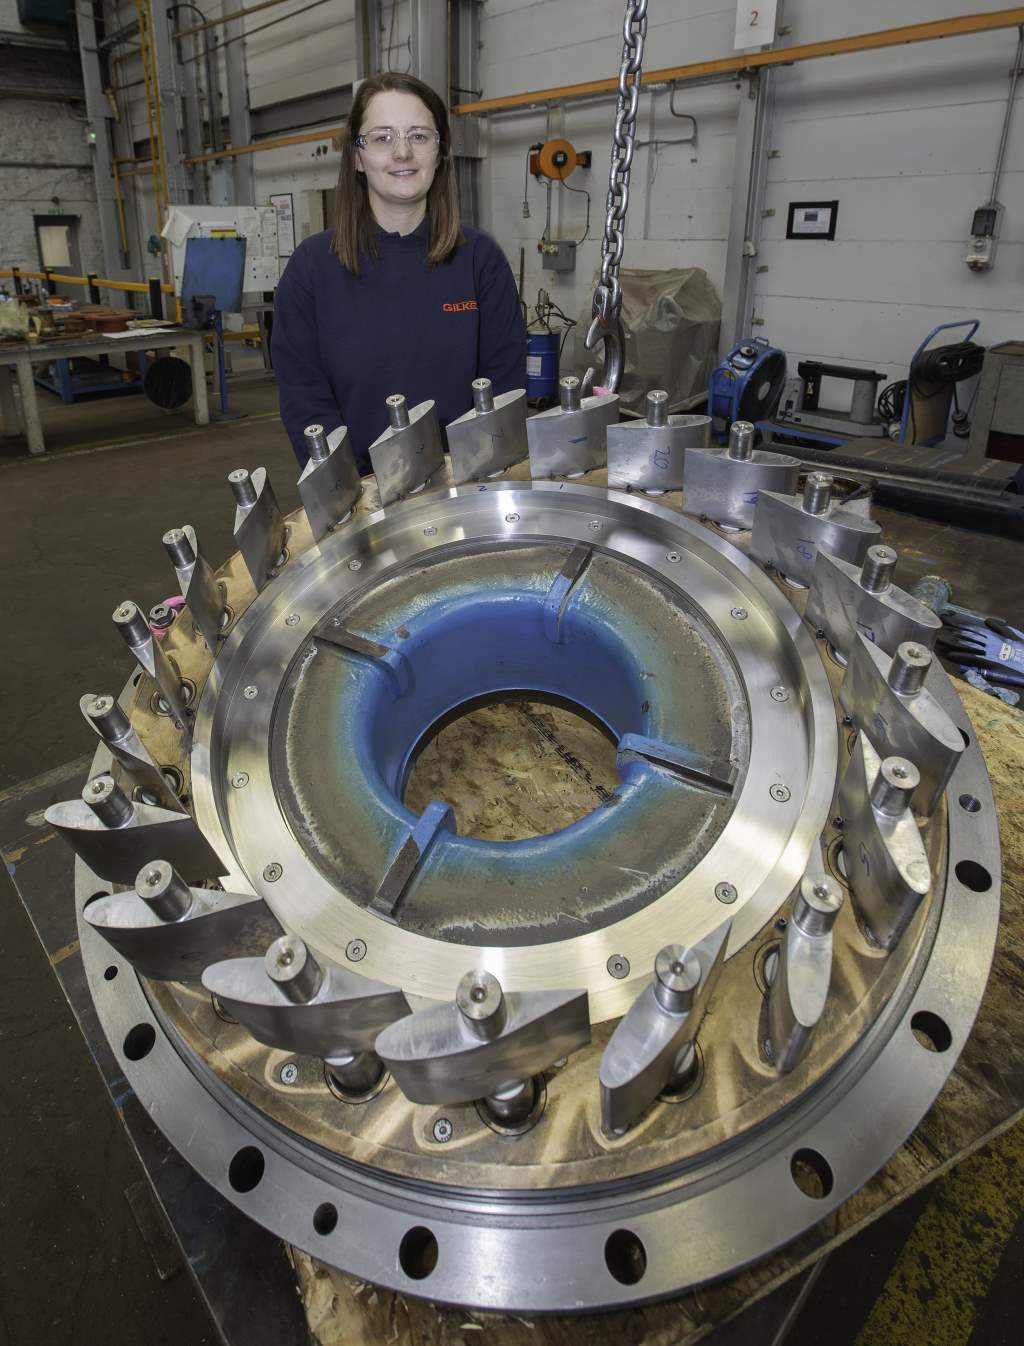 Justine Marshall with the finished machined ring in-situ after machining